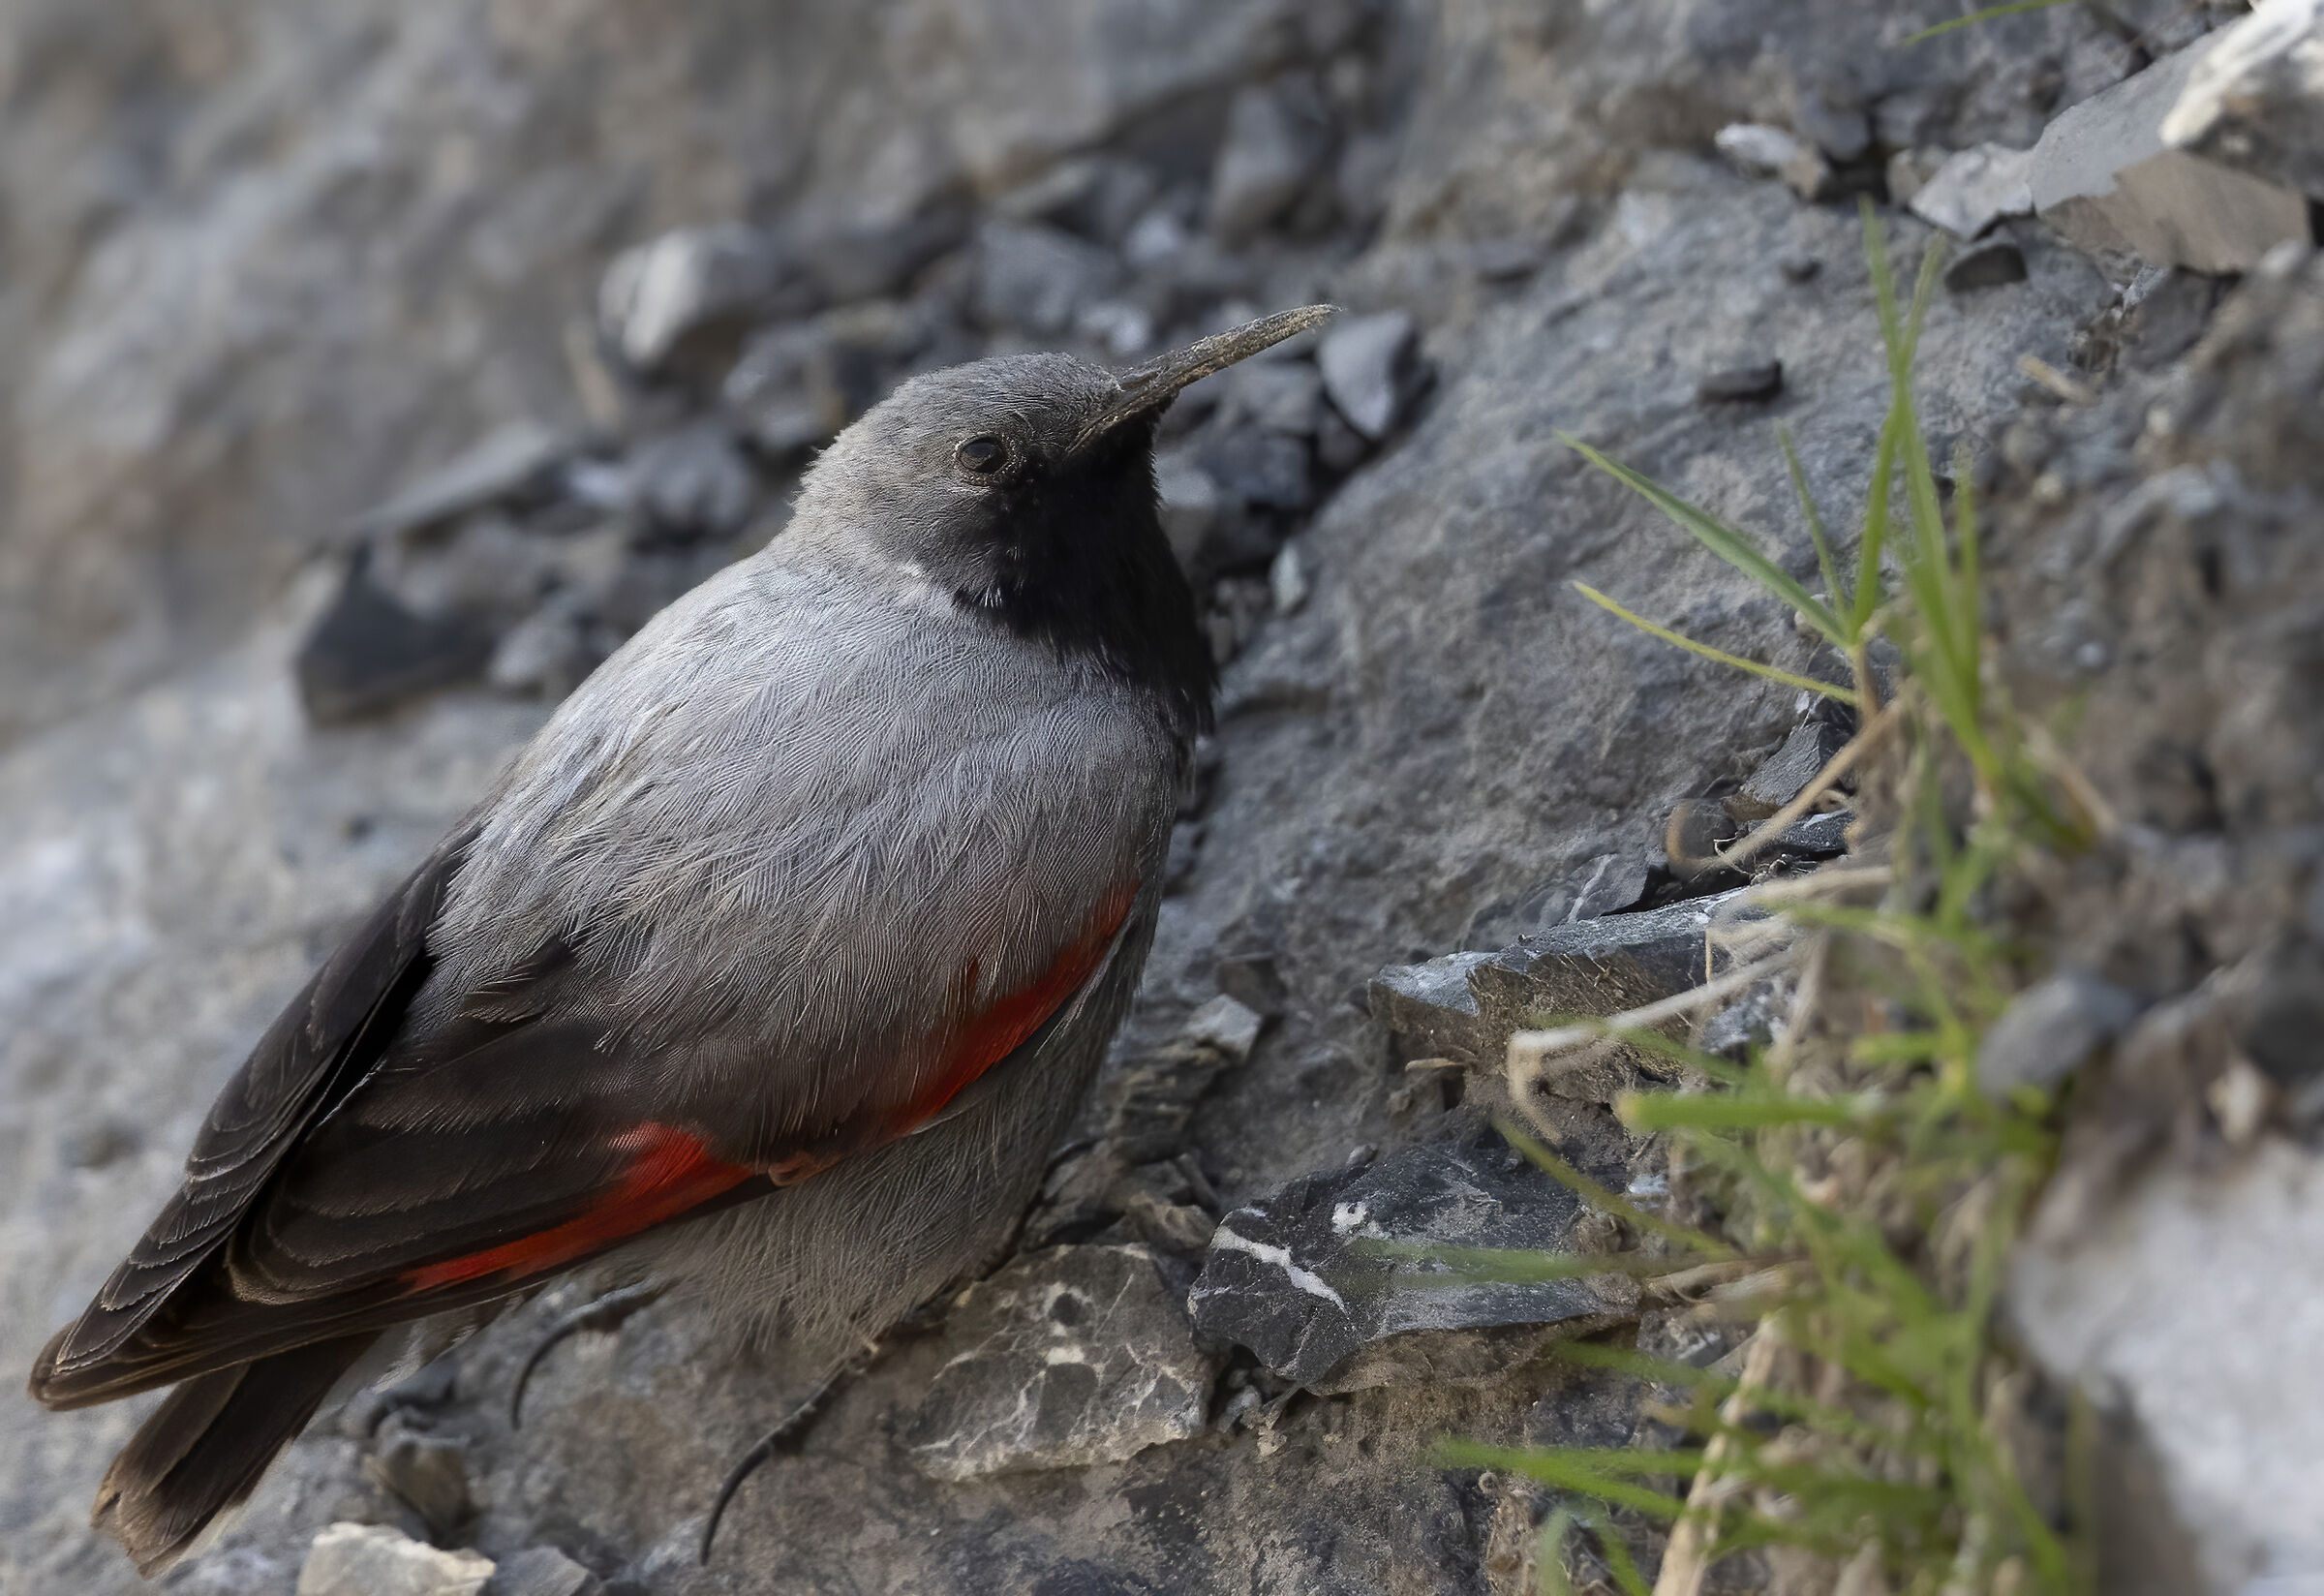 To see it better, wallcreeper...